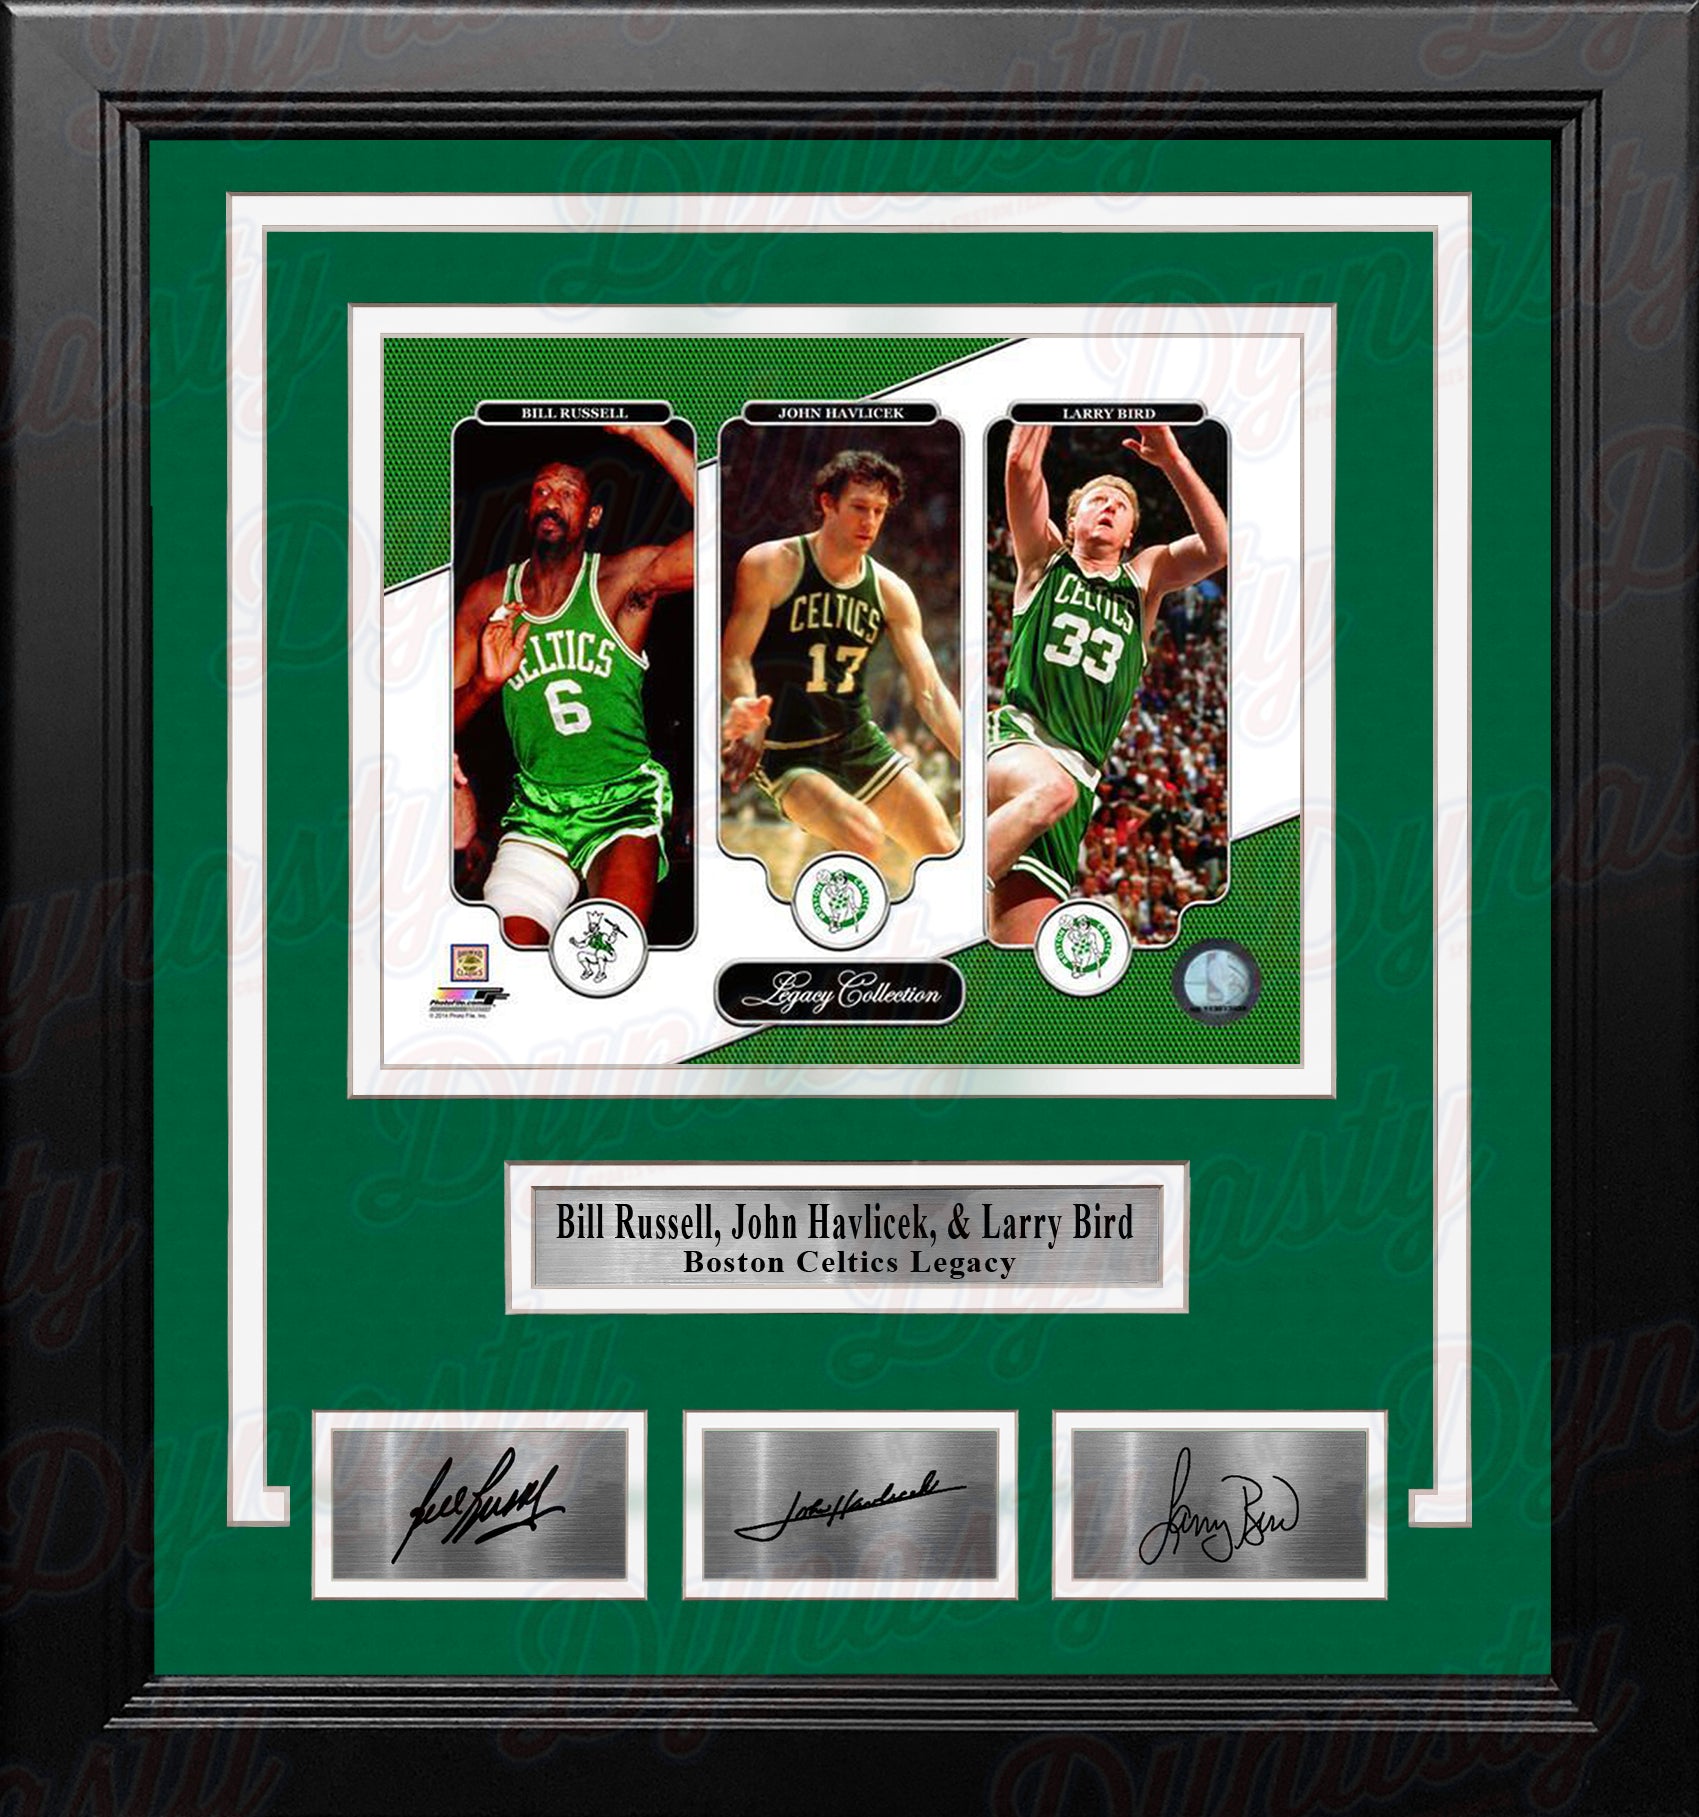 Kyrie Irving Signed Boston Celtics Nba Collage Framed With Photos+